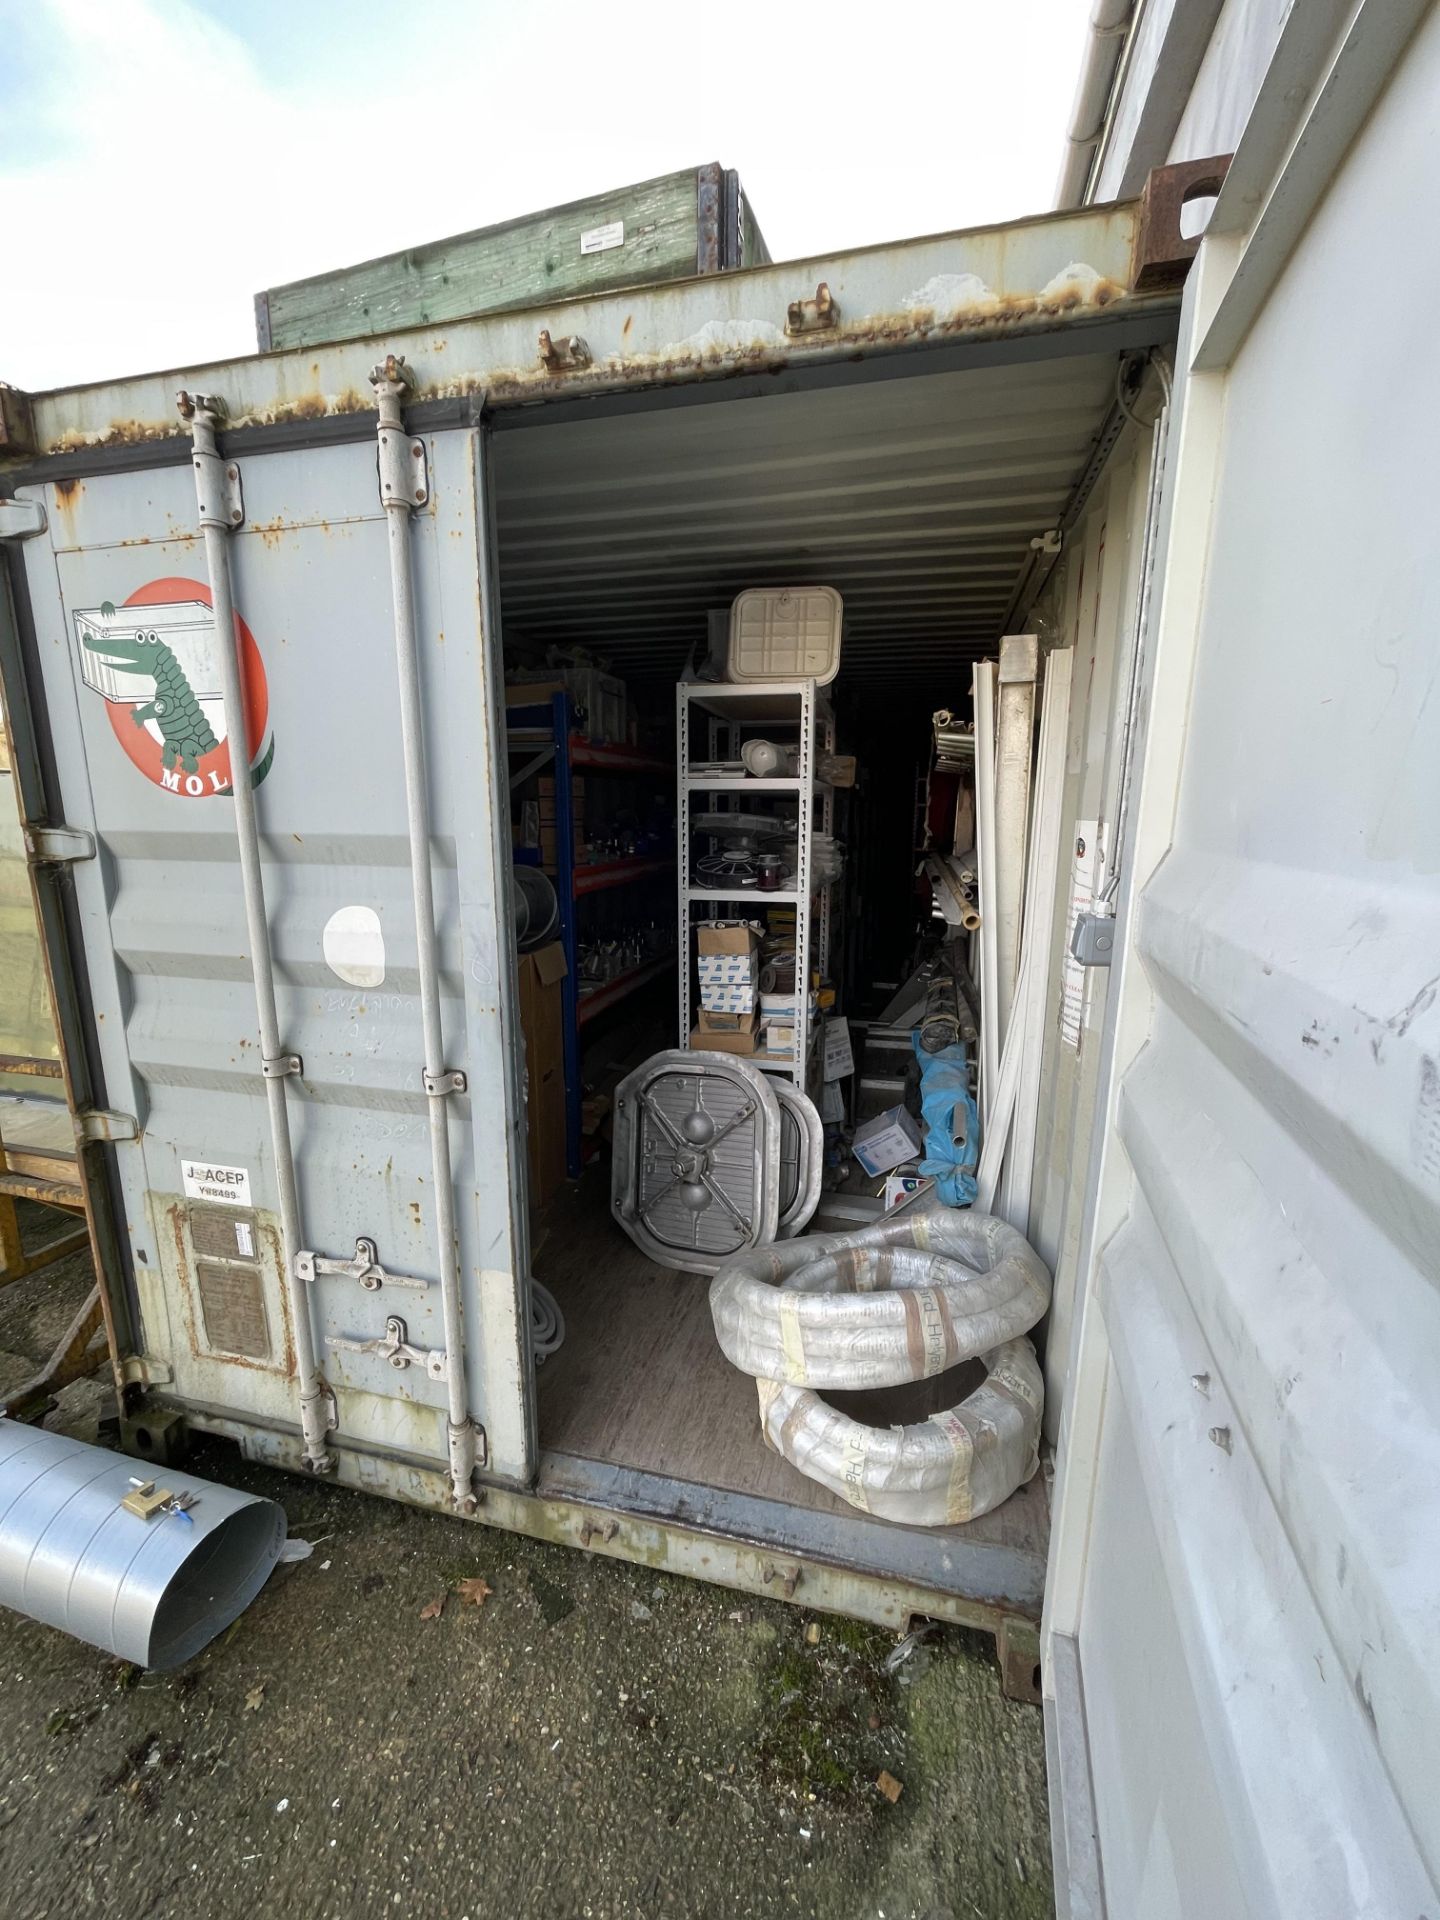 2004 CIMC Type 1AA-091A42G1G 40' Shipping Container S/No. NSSC04B 07636 and Contents to Included - Image 4 of 27